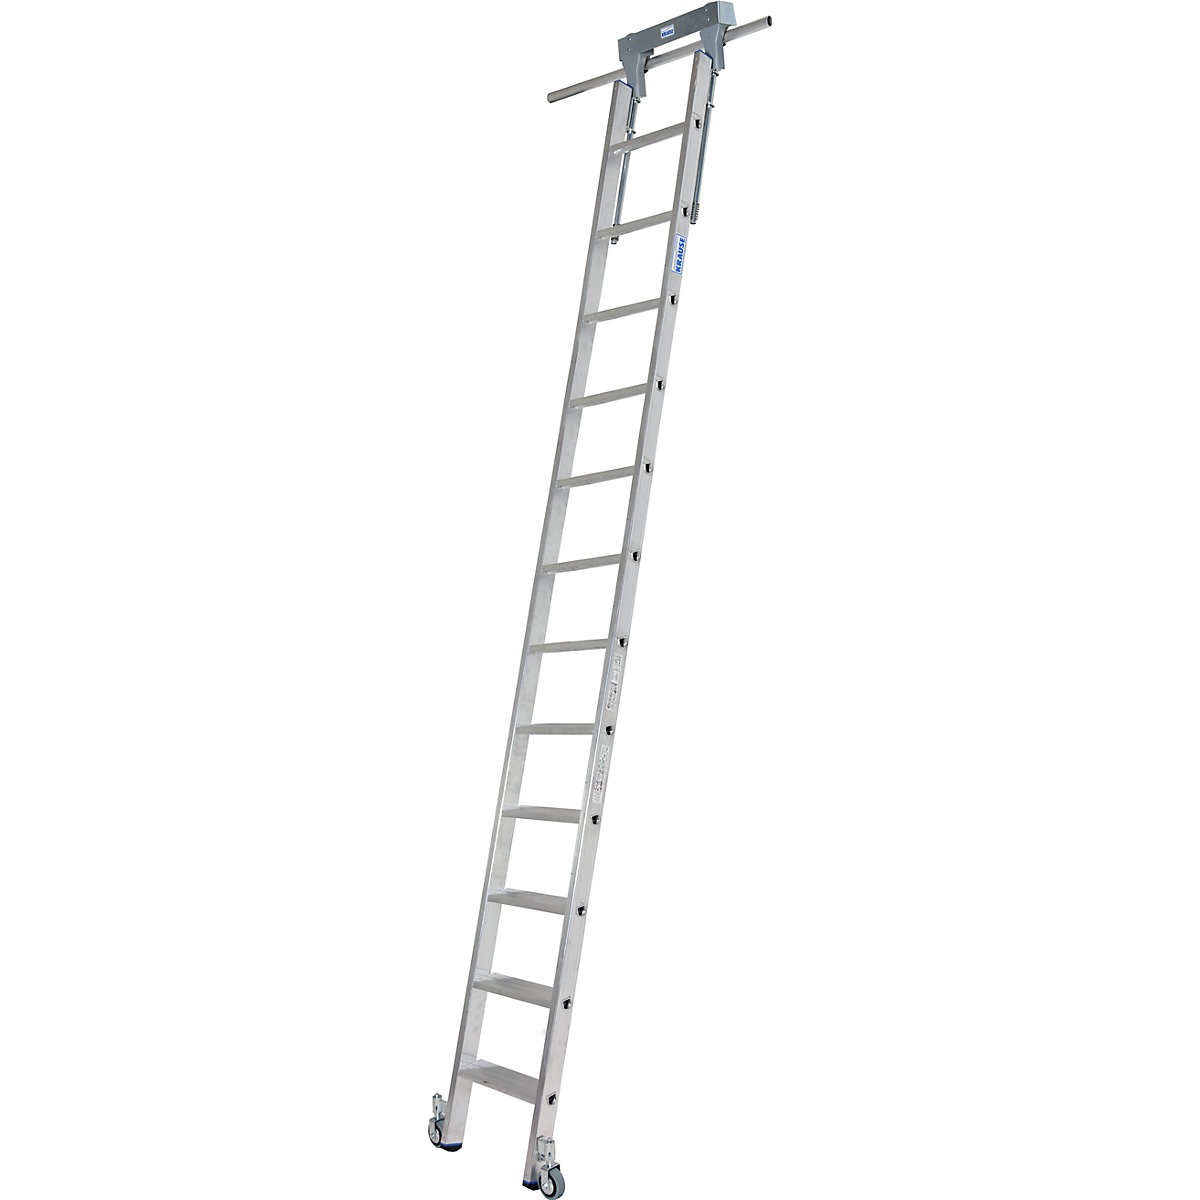 KRAUSE – Step shelf ladder, with wheels on top for round tubing rail system, 12 steps